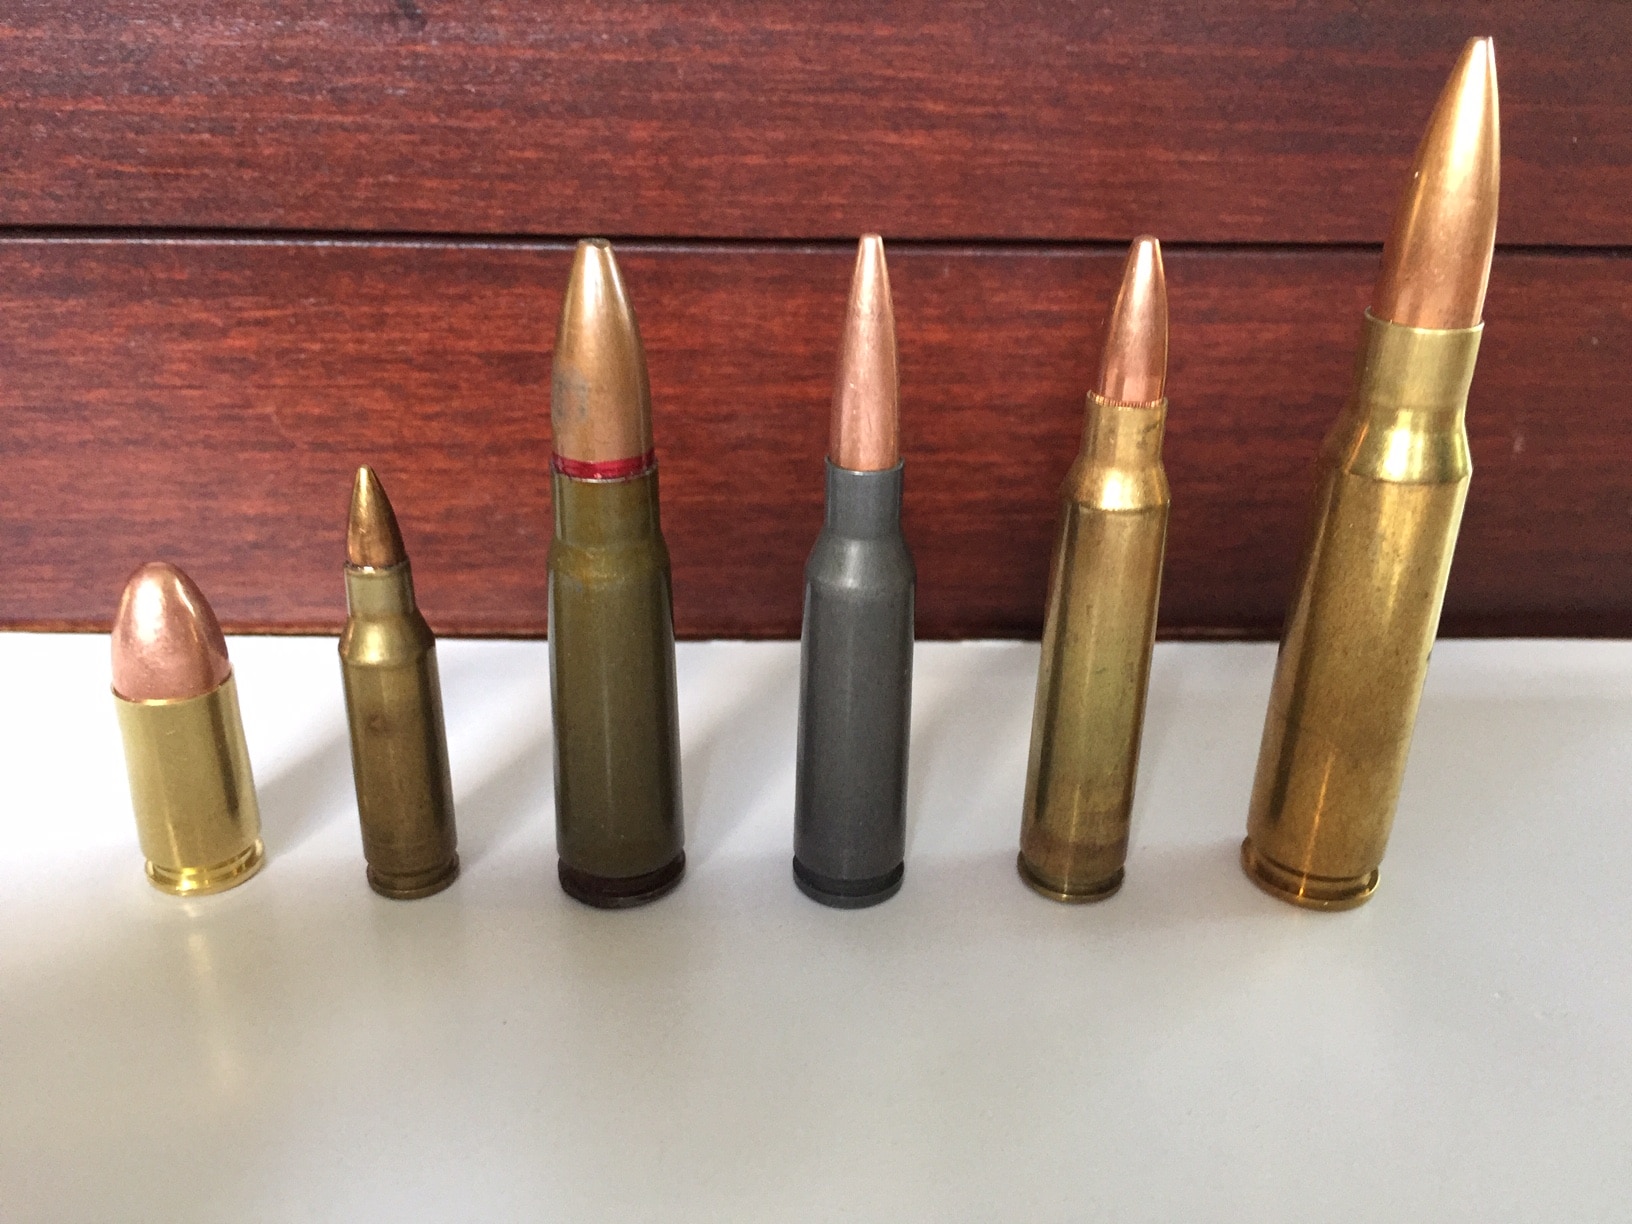 Figure 2 Sample cartridges left to right: 9x19mm, 4.6x30mm, 7.62x39mm, 5.45x39mm, 5.56x45mm, 7.62x51mm. Photograph by author.